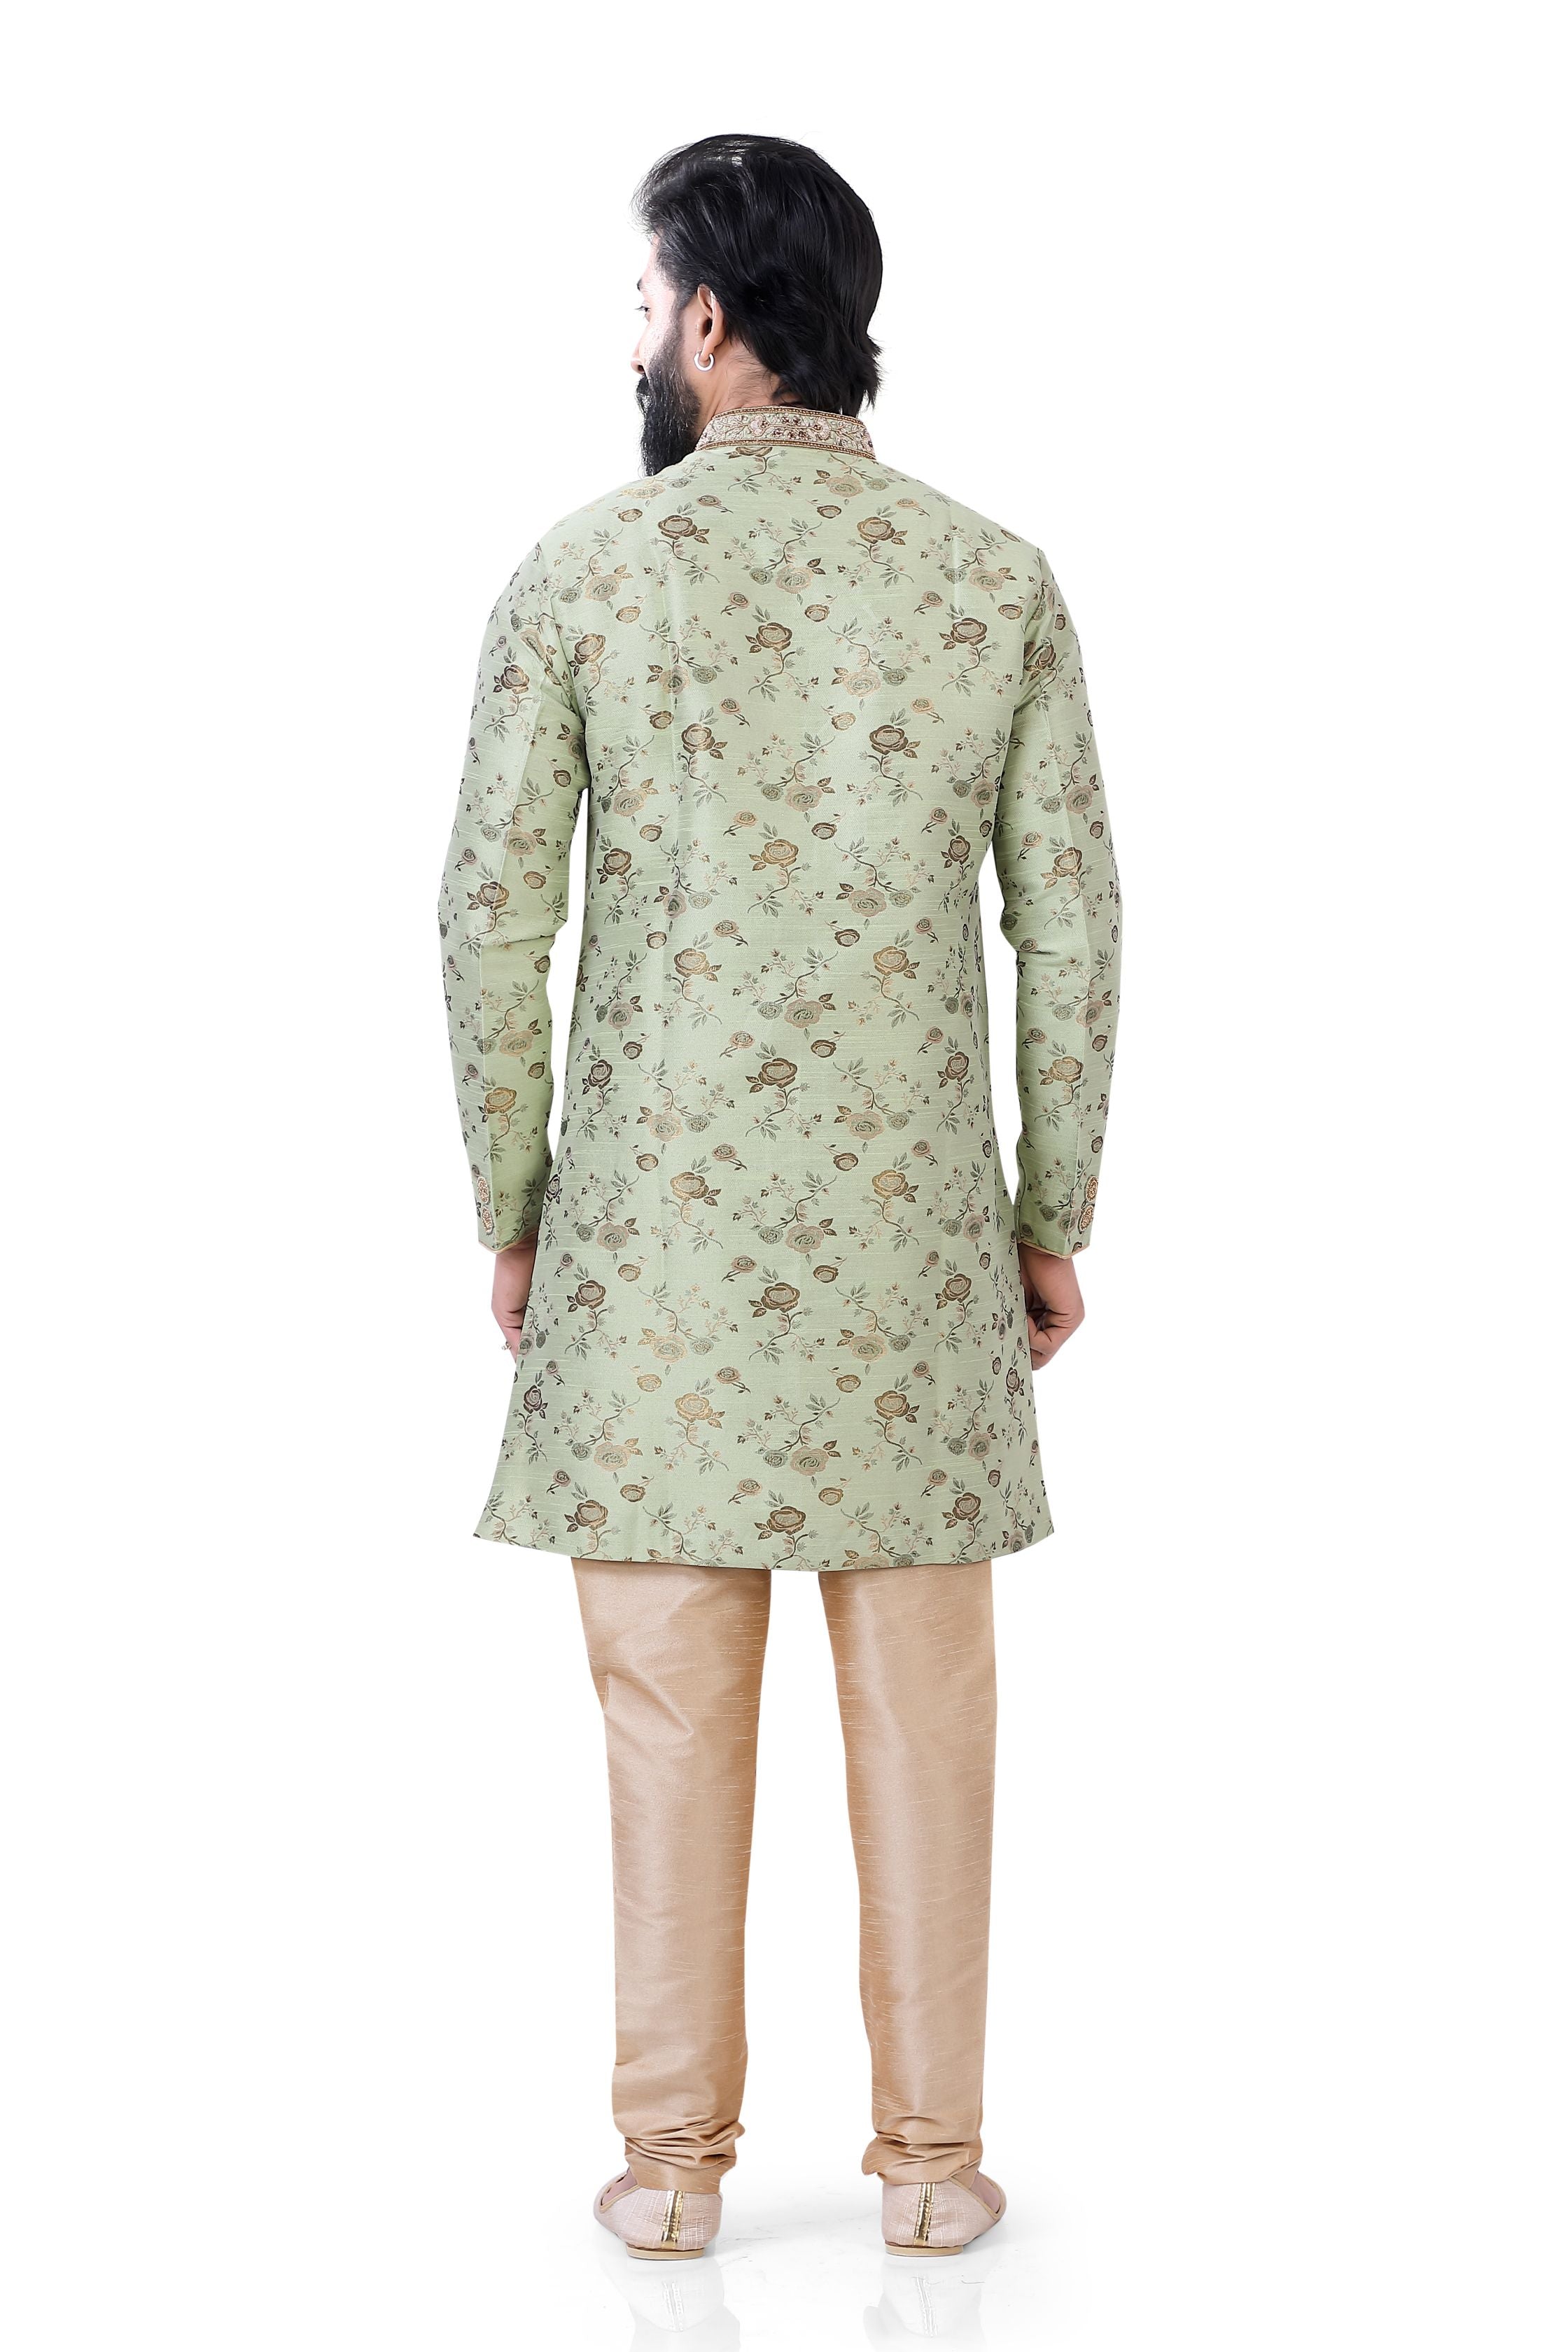 Aangrakha style Indo western in Pista Green